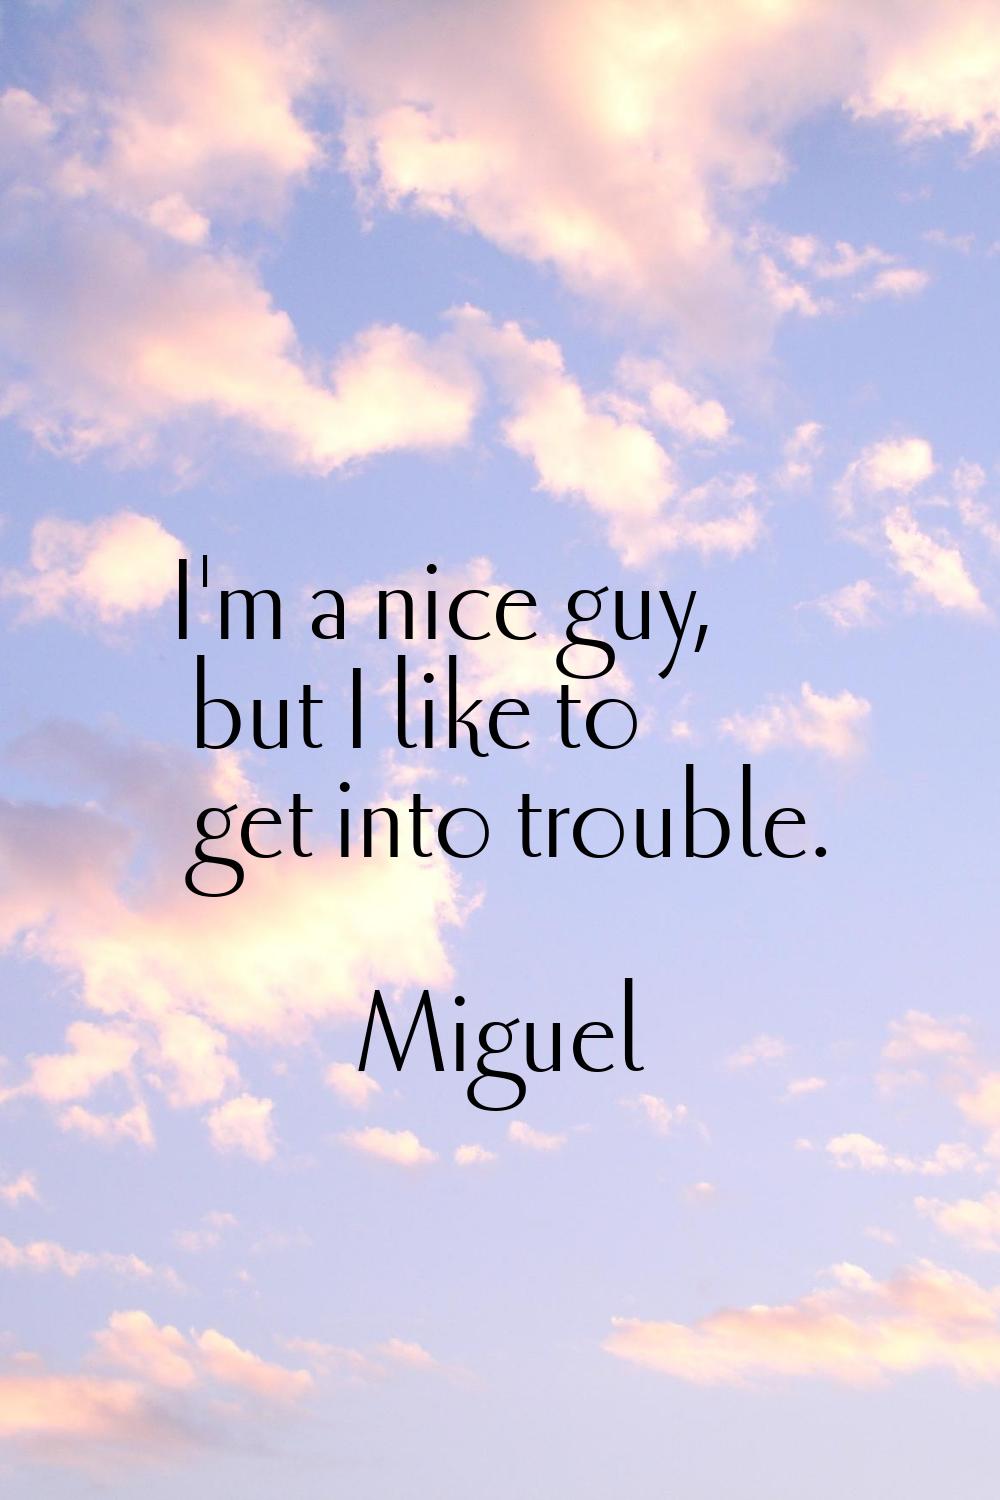 I'm a nice guy, but I like to get into trouble.